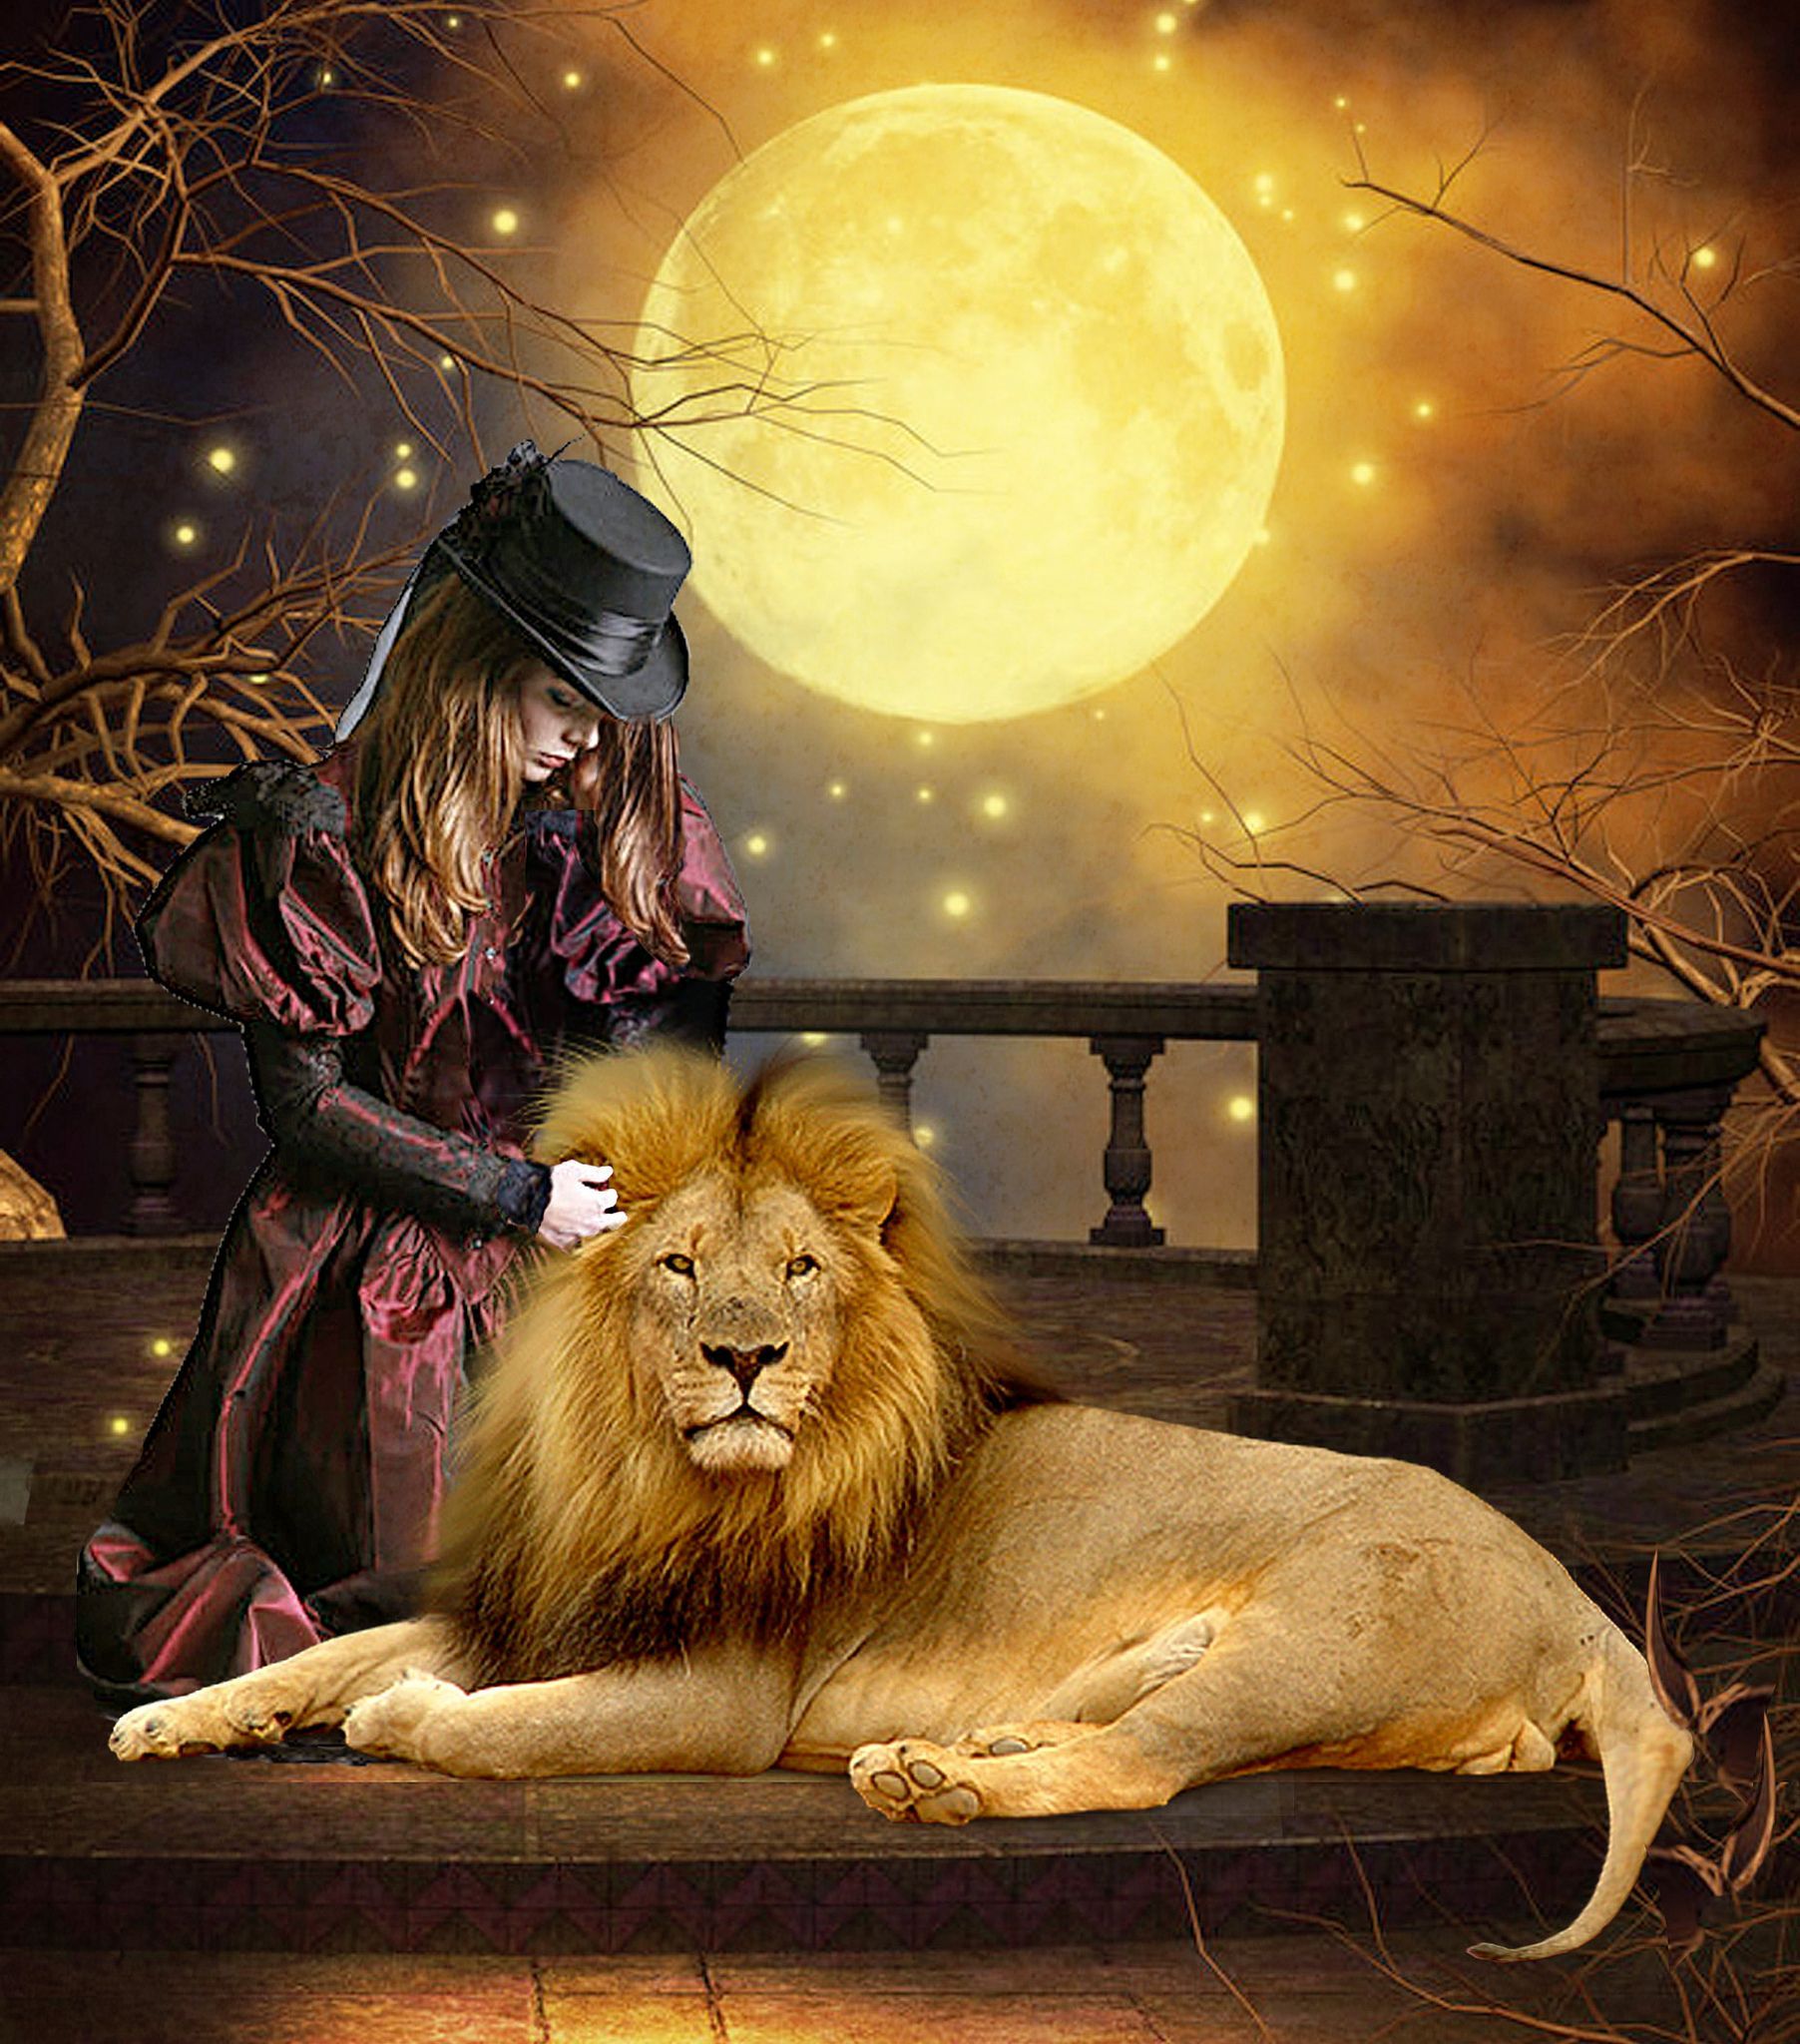 Girl and lion in the moonlight. Lion art, Lion love, Lion